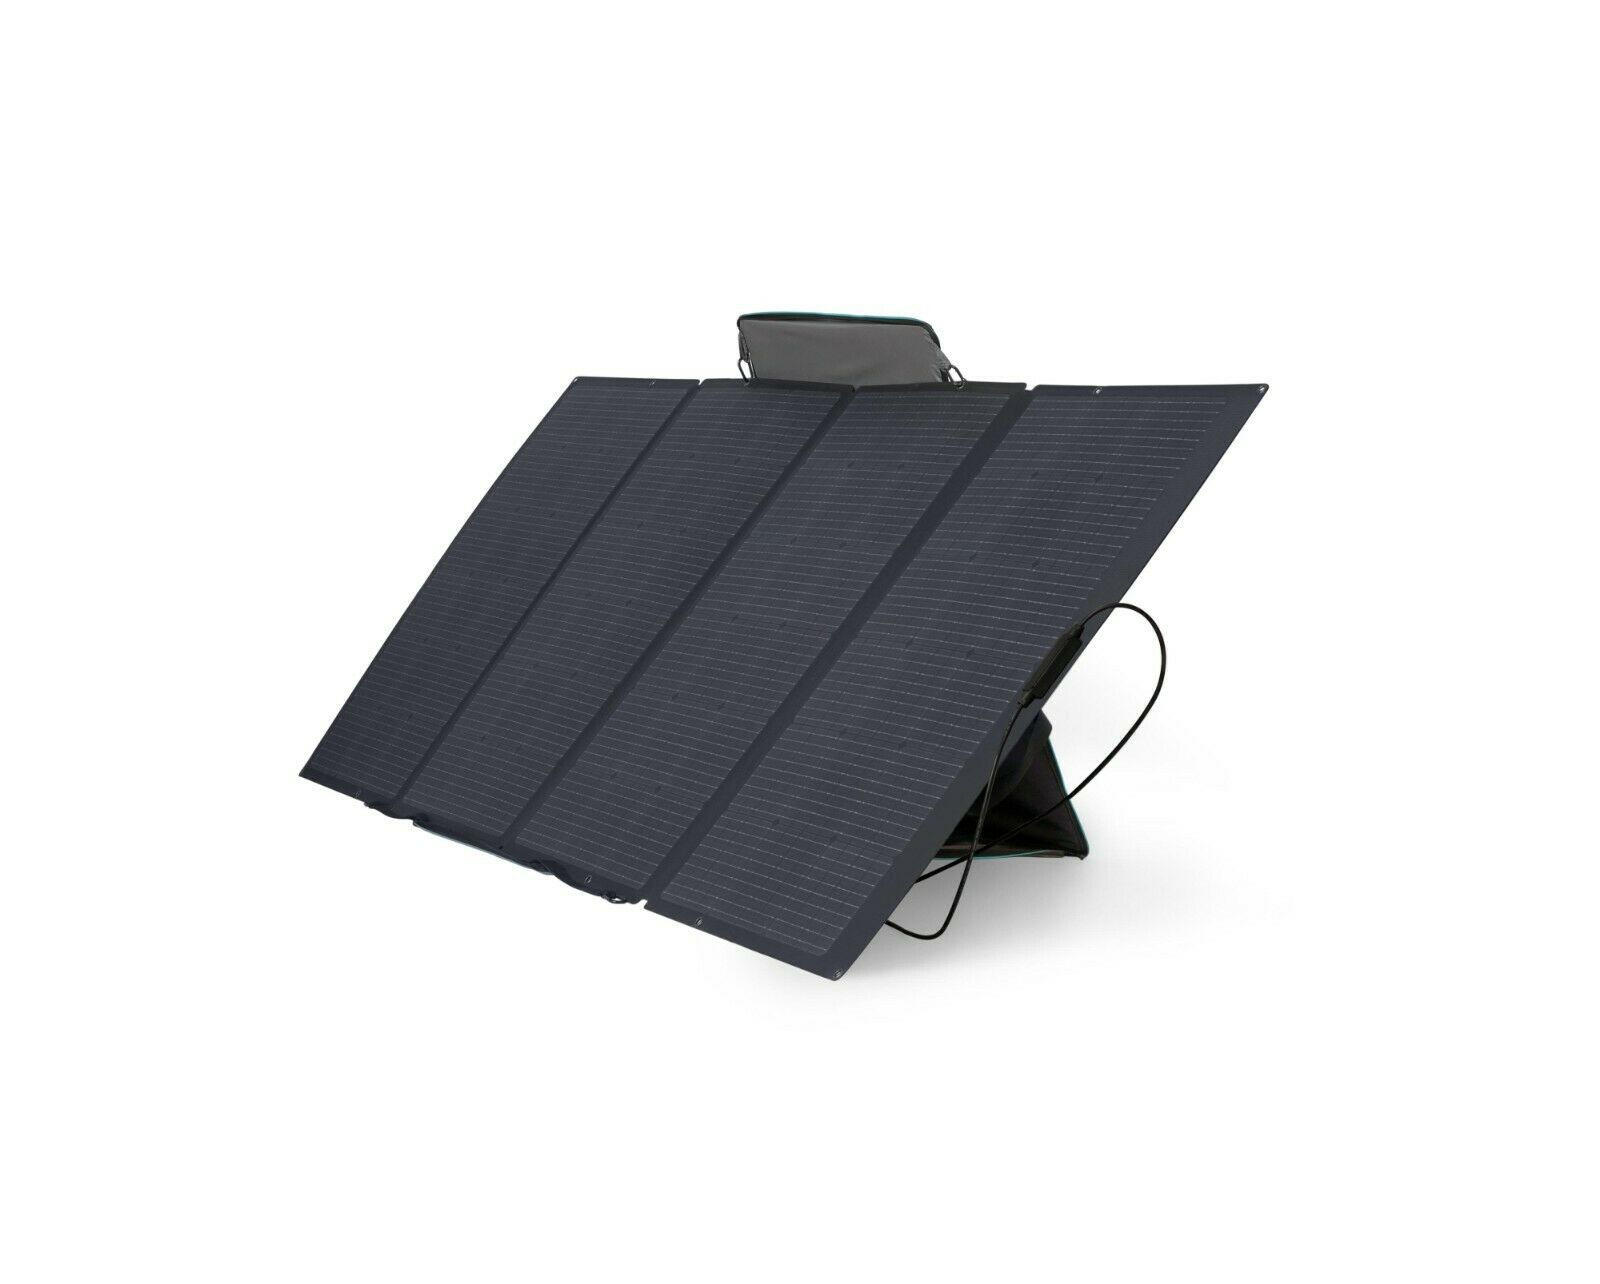 EcoFlow - 400W Portable Solar Panel for Power Stations